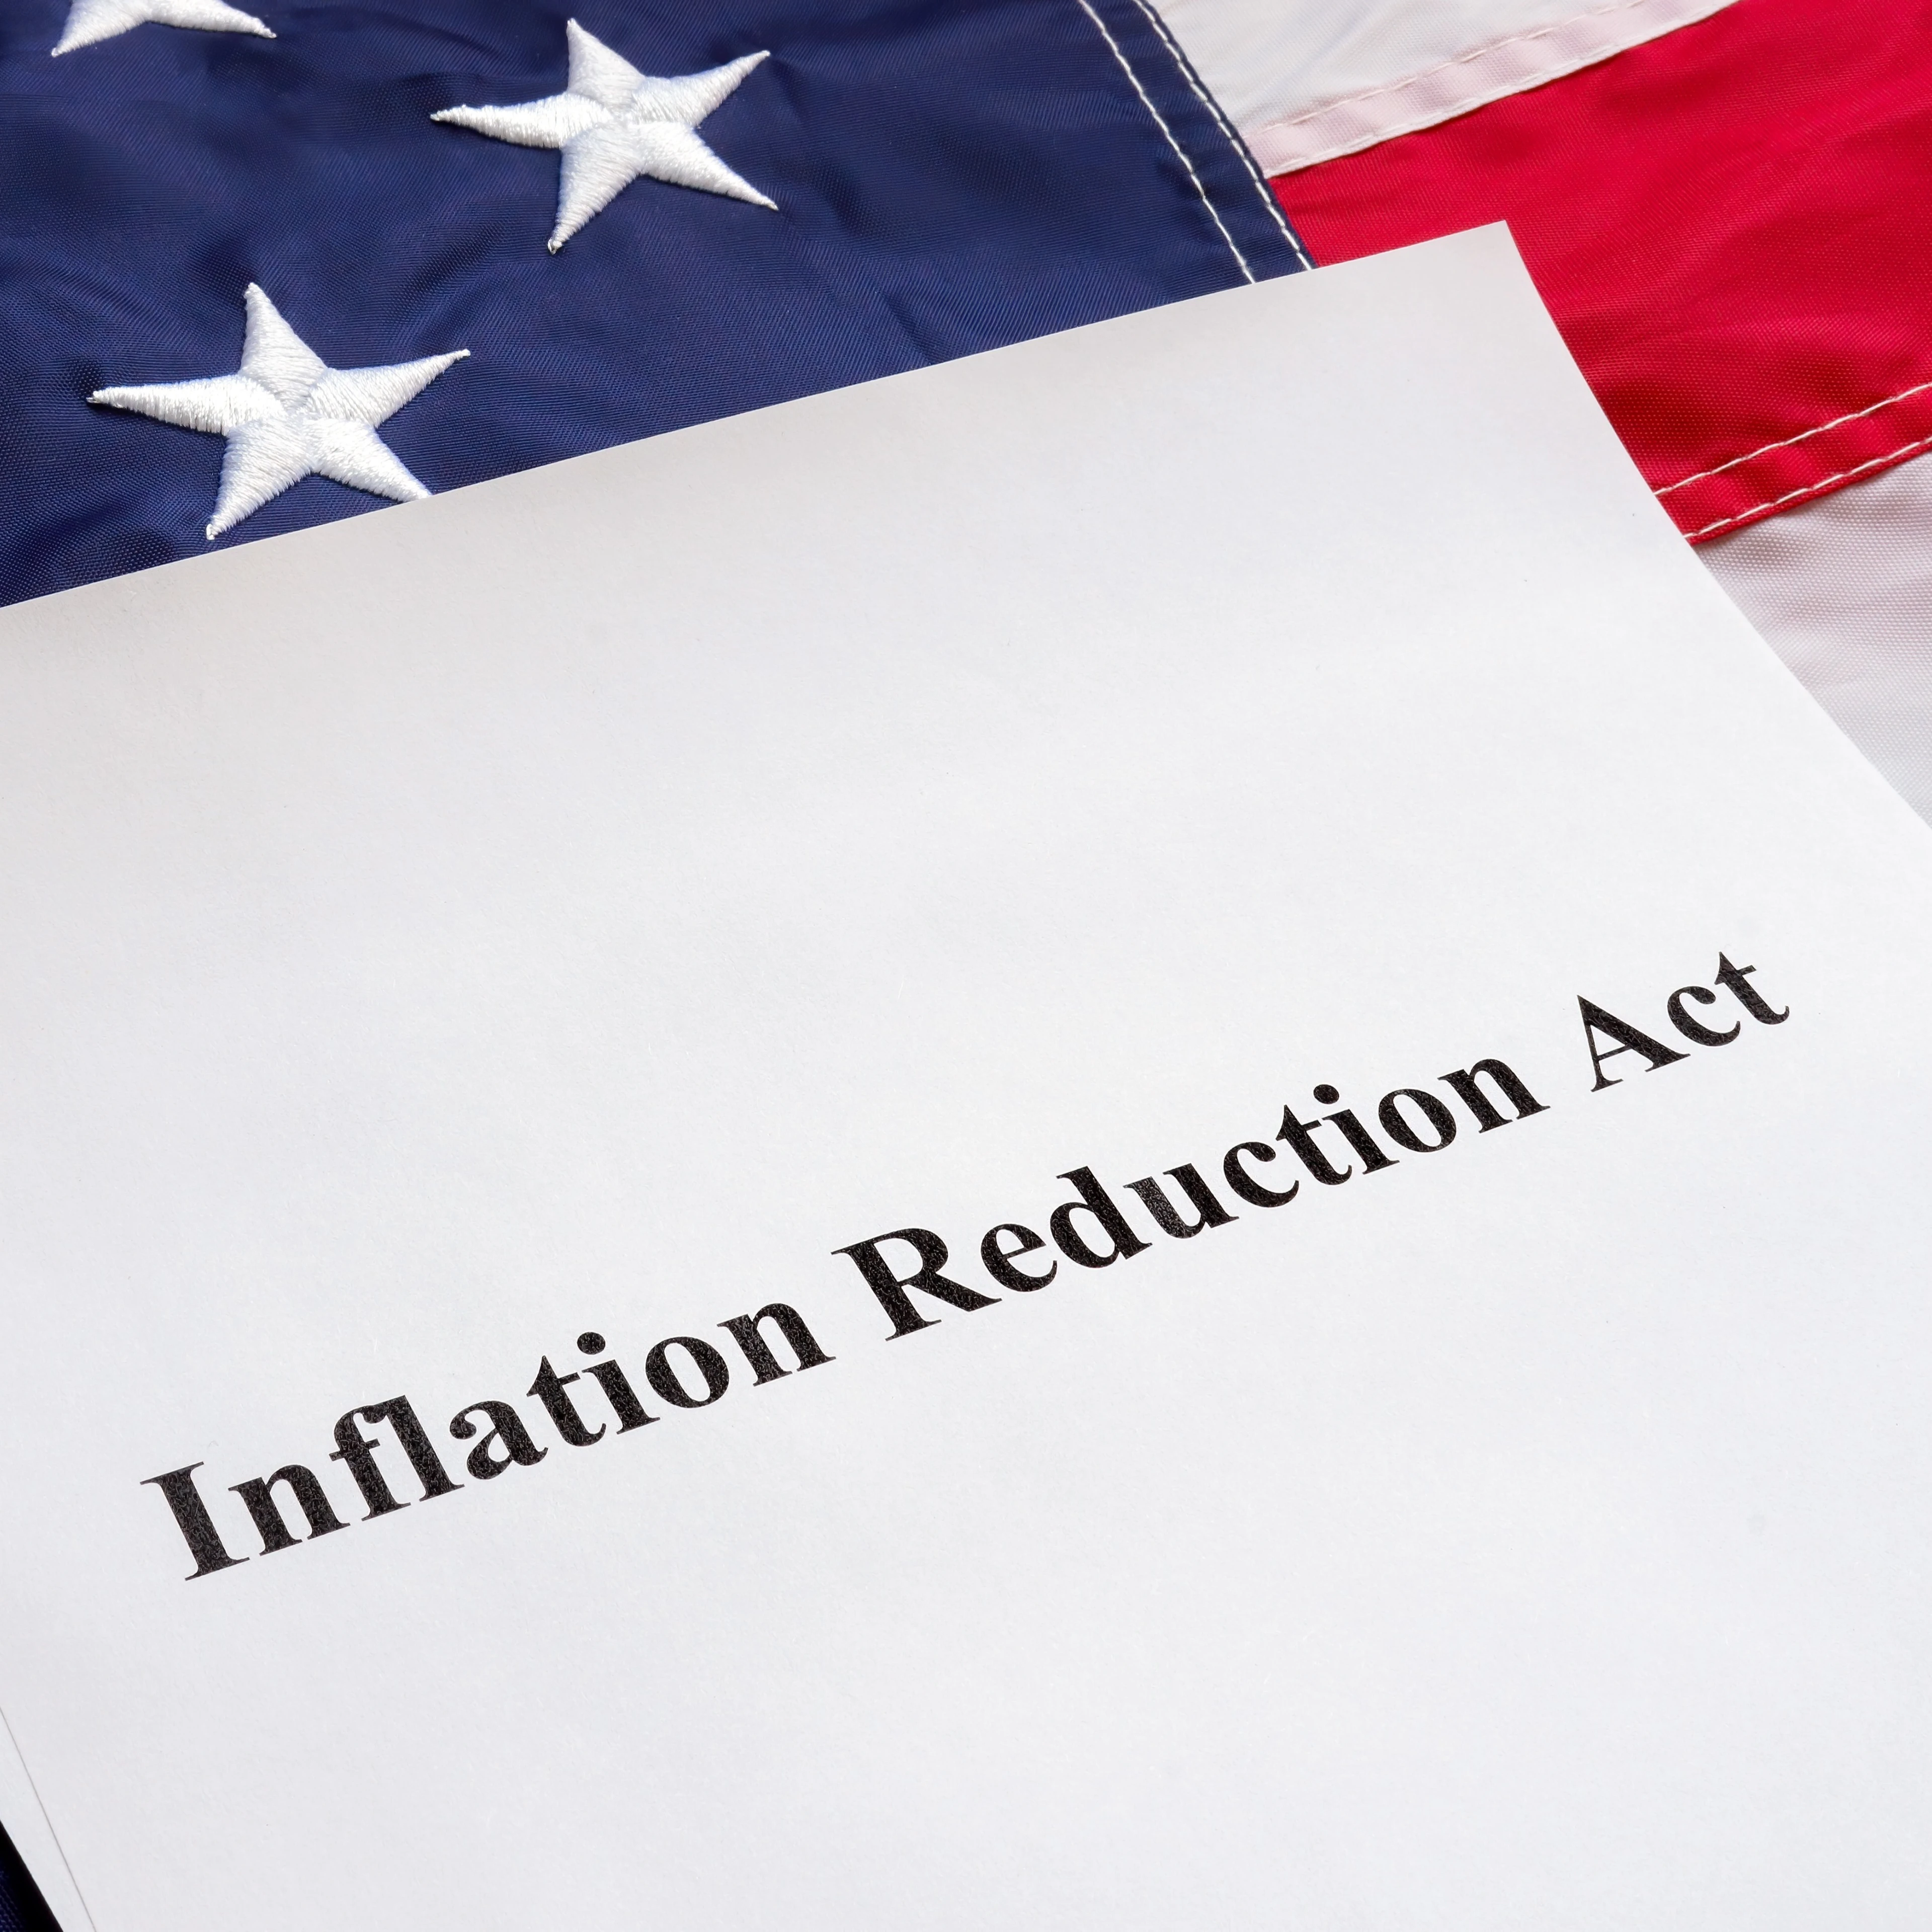 Inflation reduction act image 